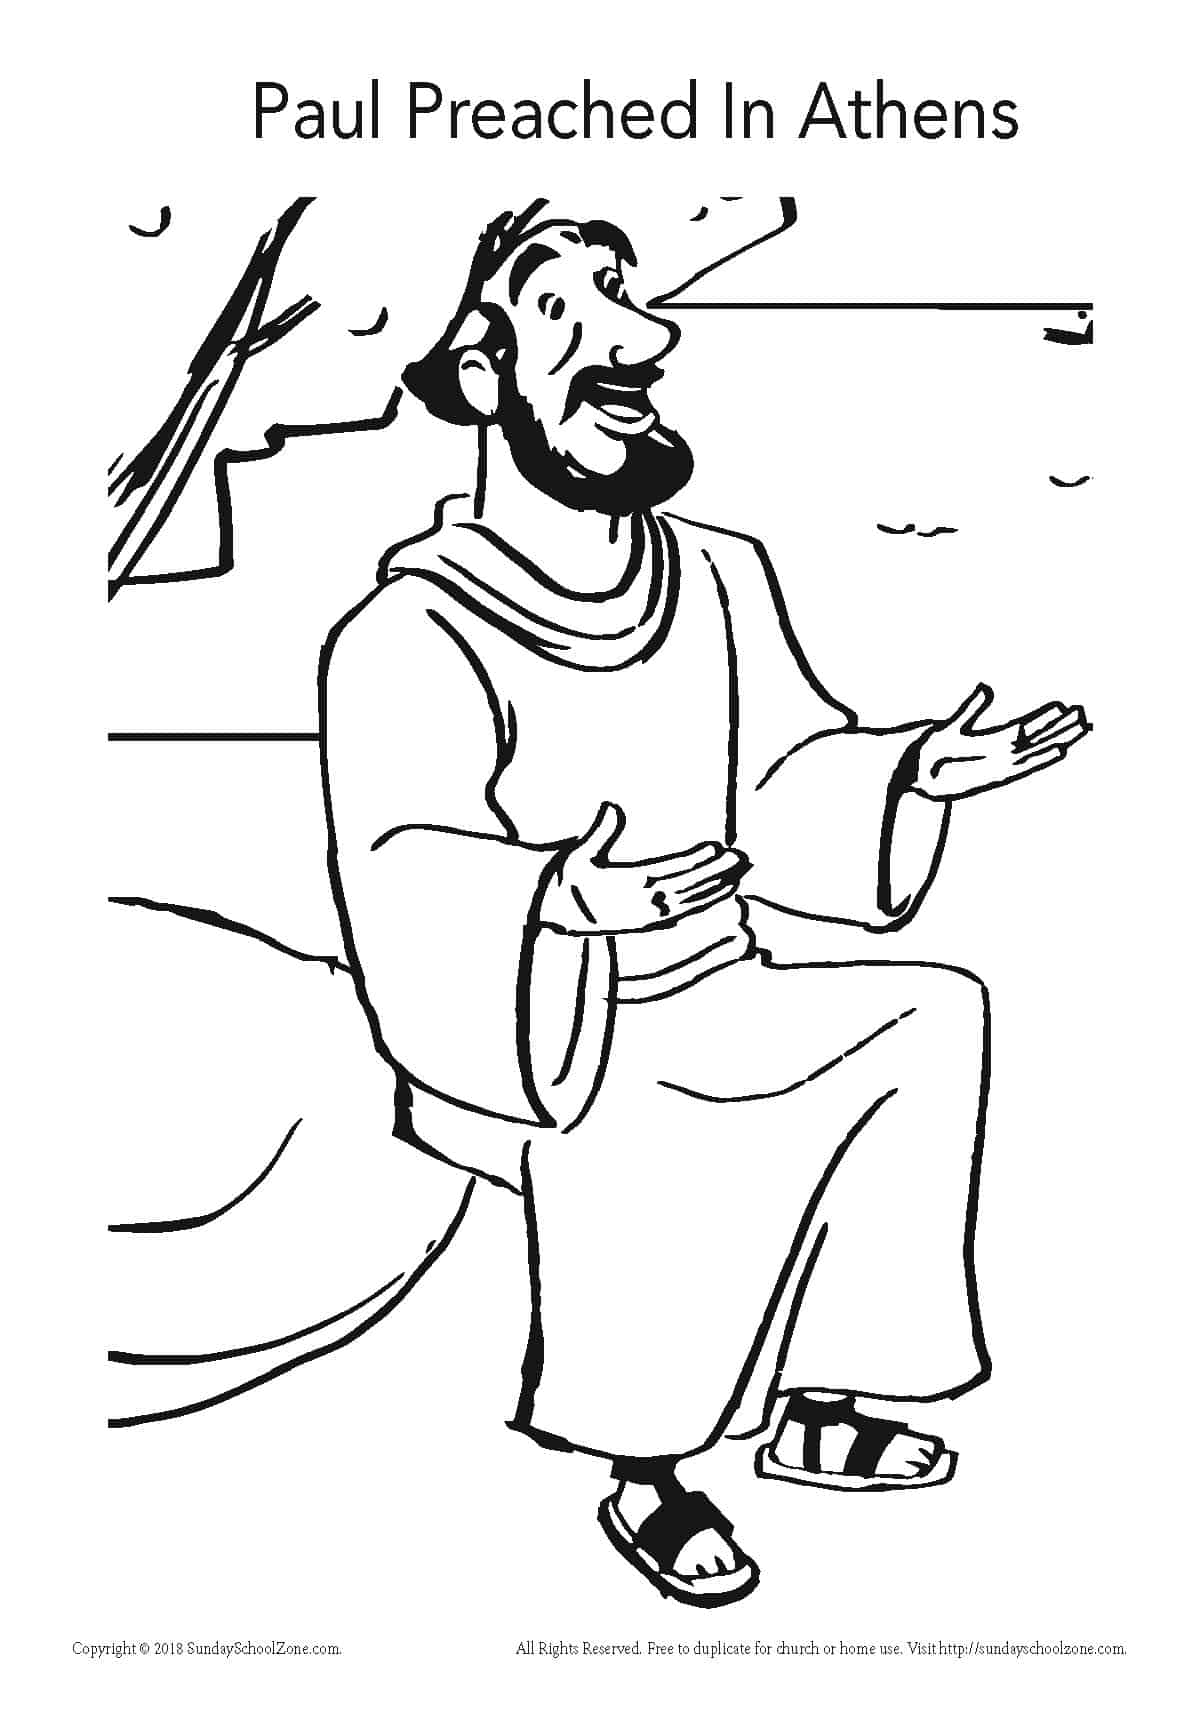 Paul Preaching Coloring Page